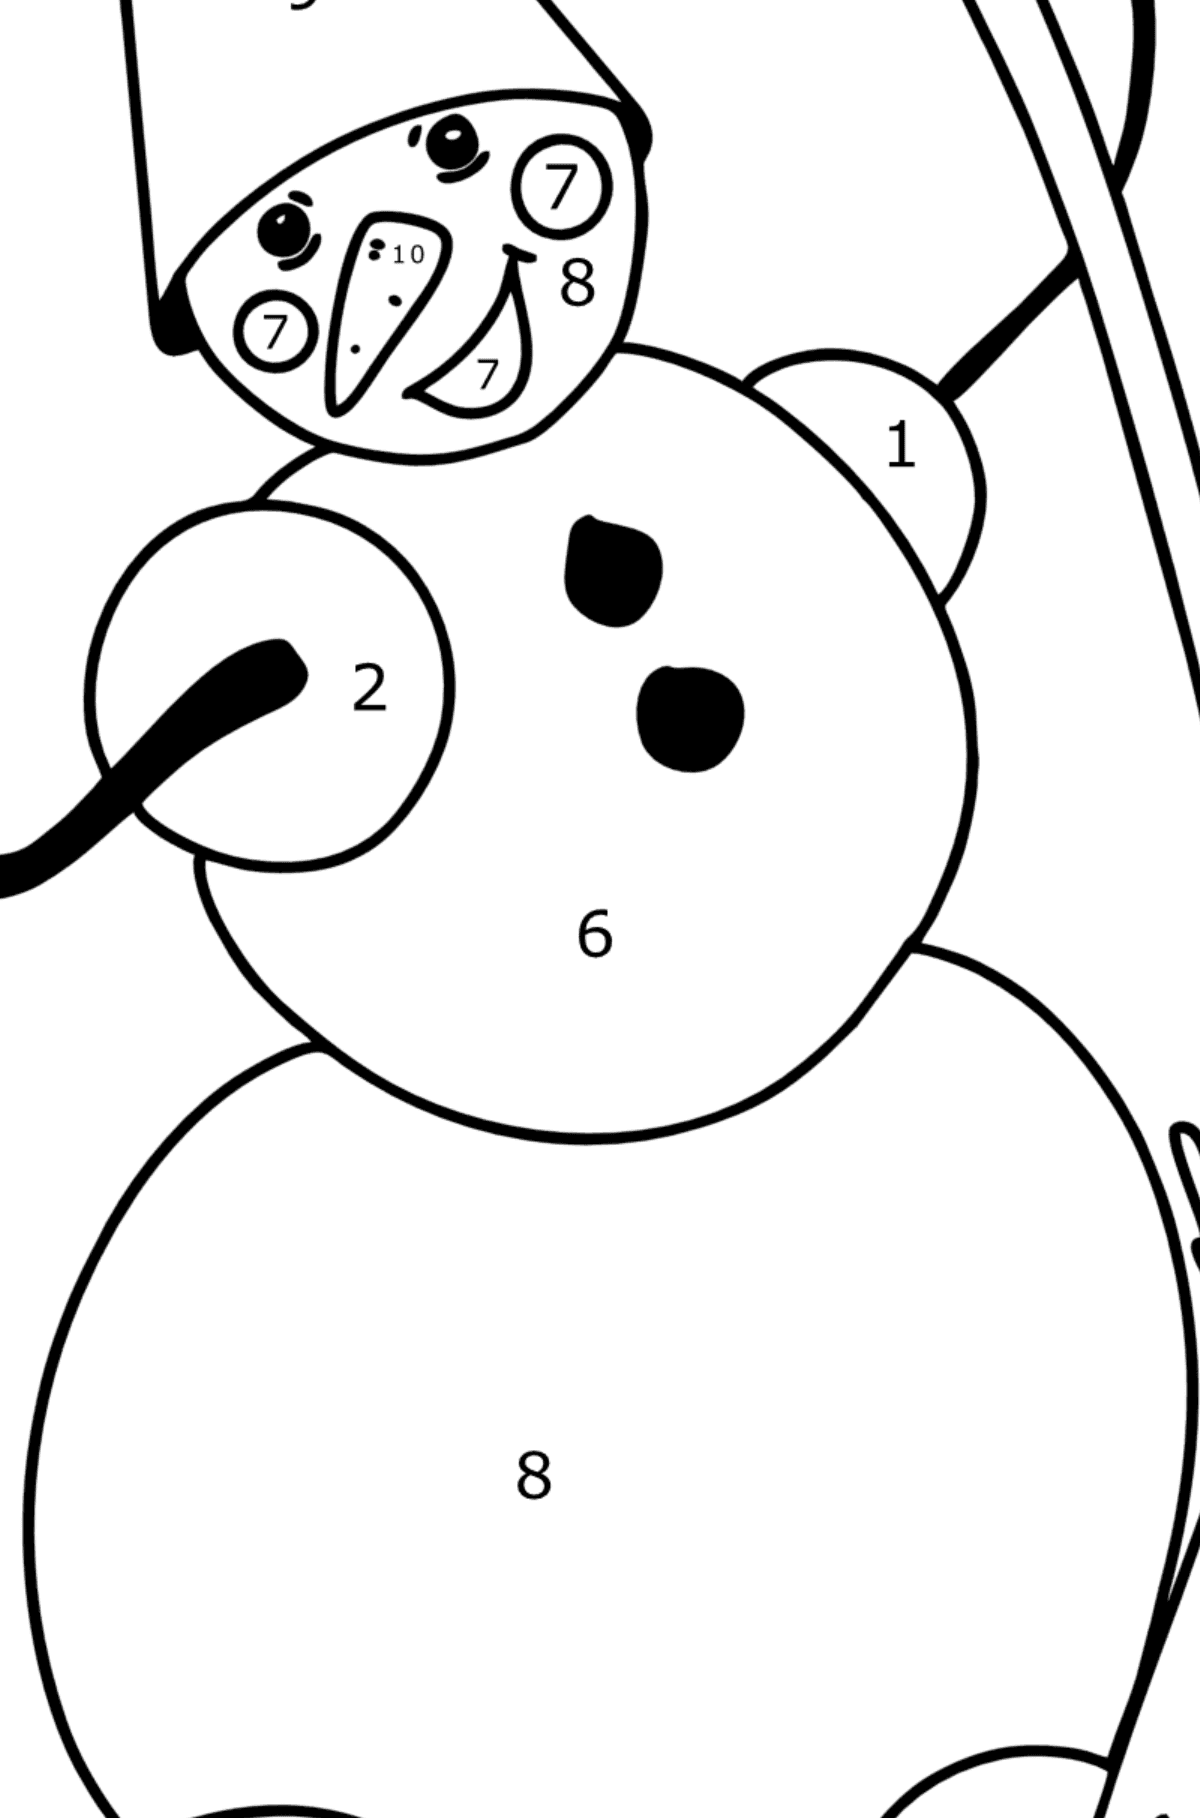 Snowman with Broom coloring page - Coloring by Numbers for Kids